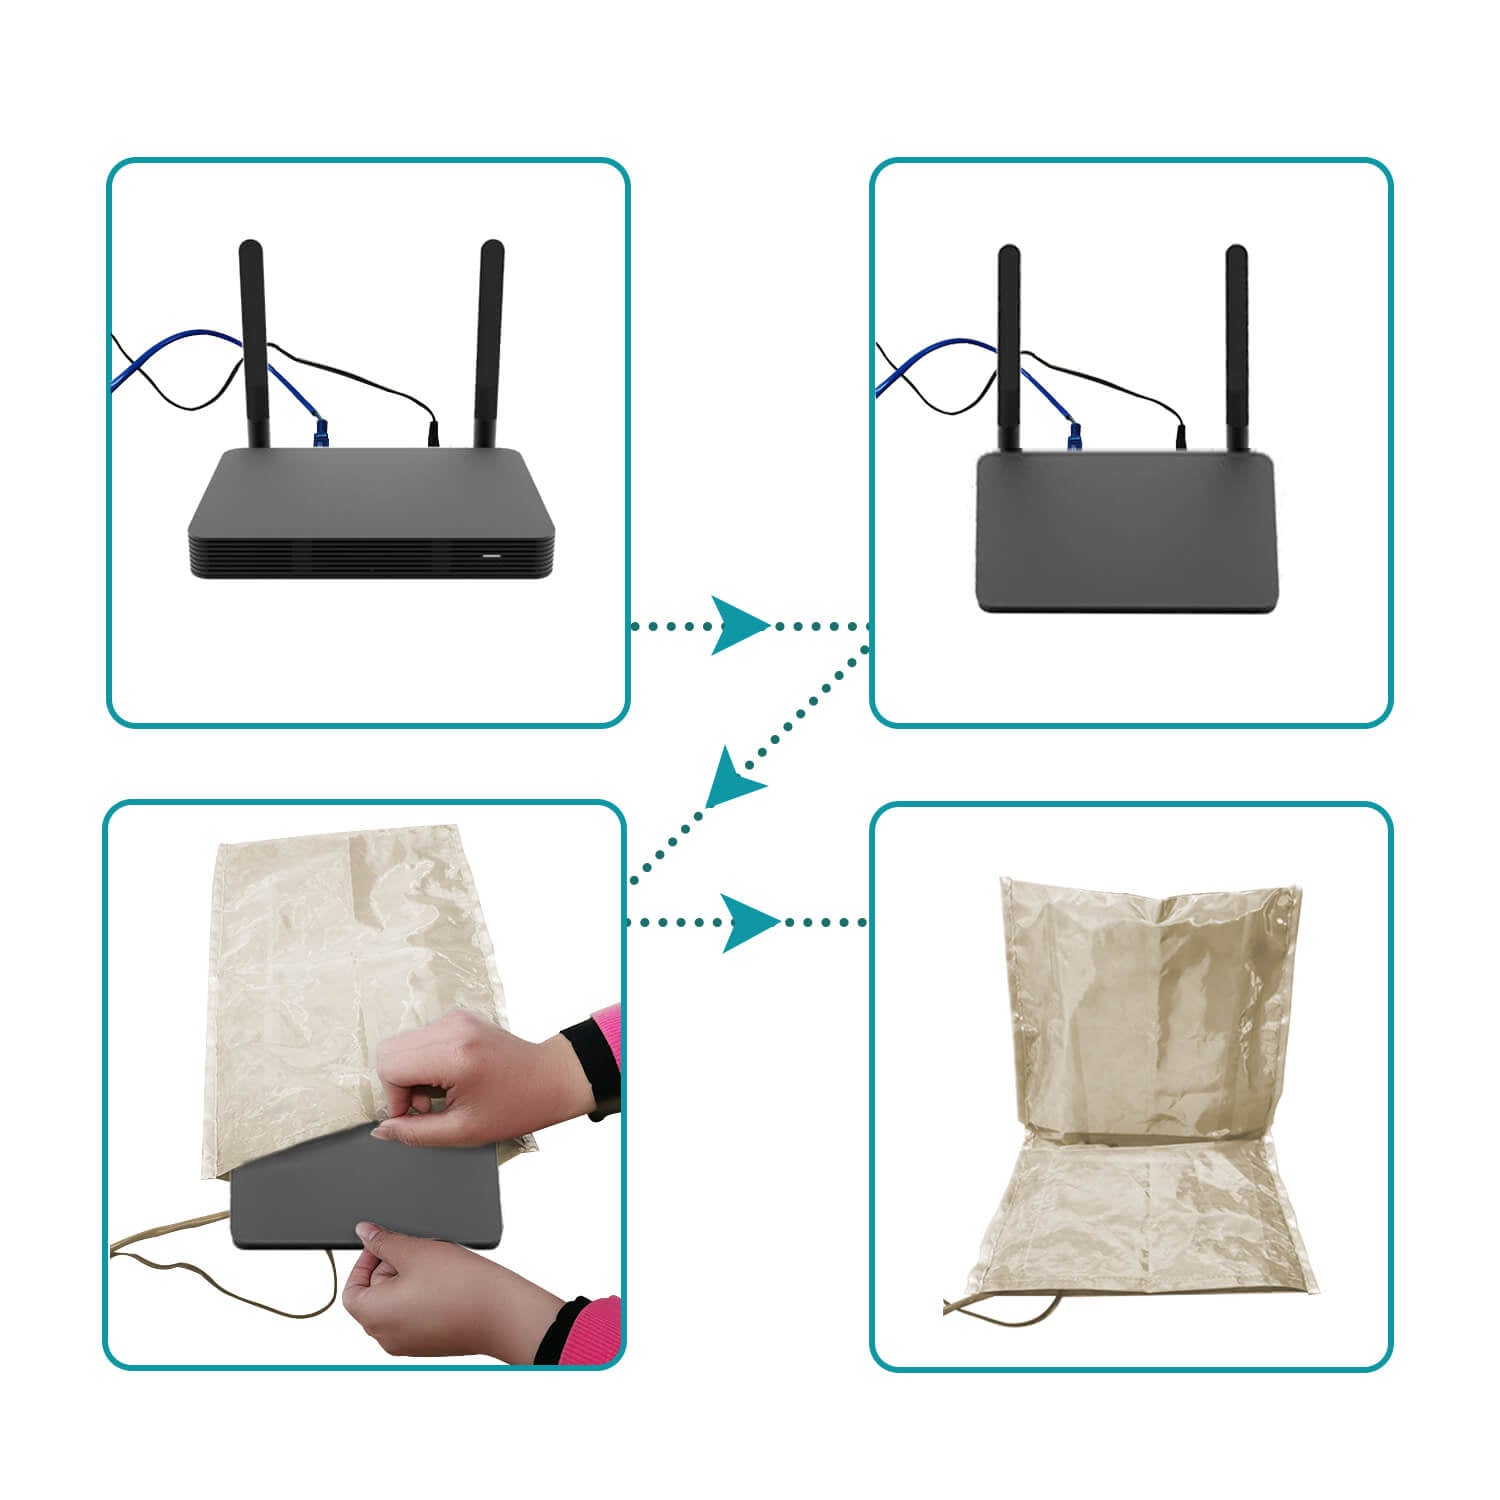 Universal WiFi Router Signal Tamer - Effectively Reduces Radiation and EMF Emissions - GroundedKiwi.nzWifi Router Signal Tamer Wifi Router Signal Tamerbagblockingcover